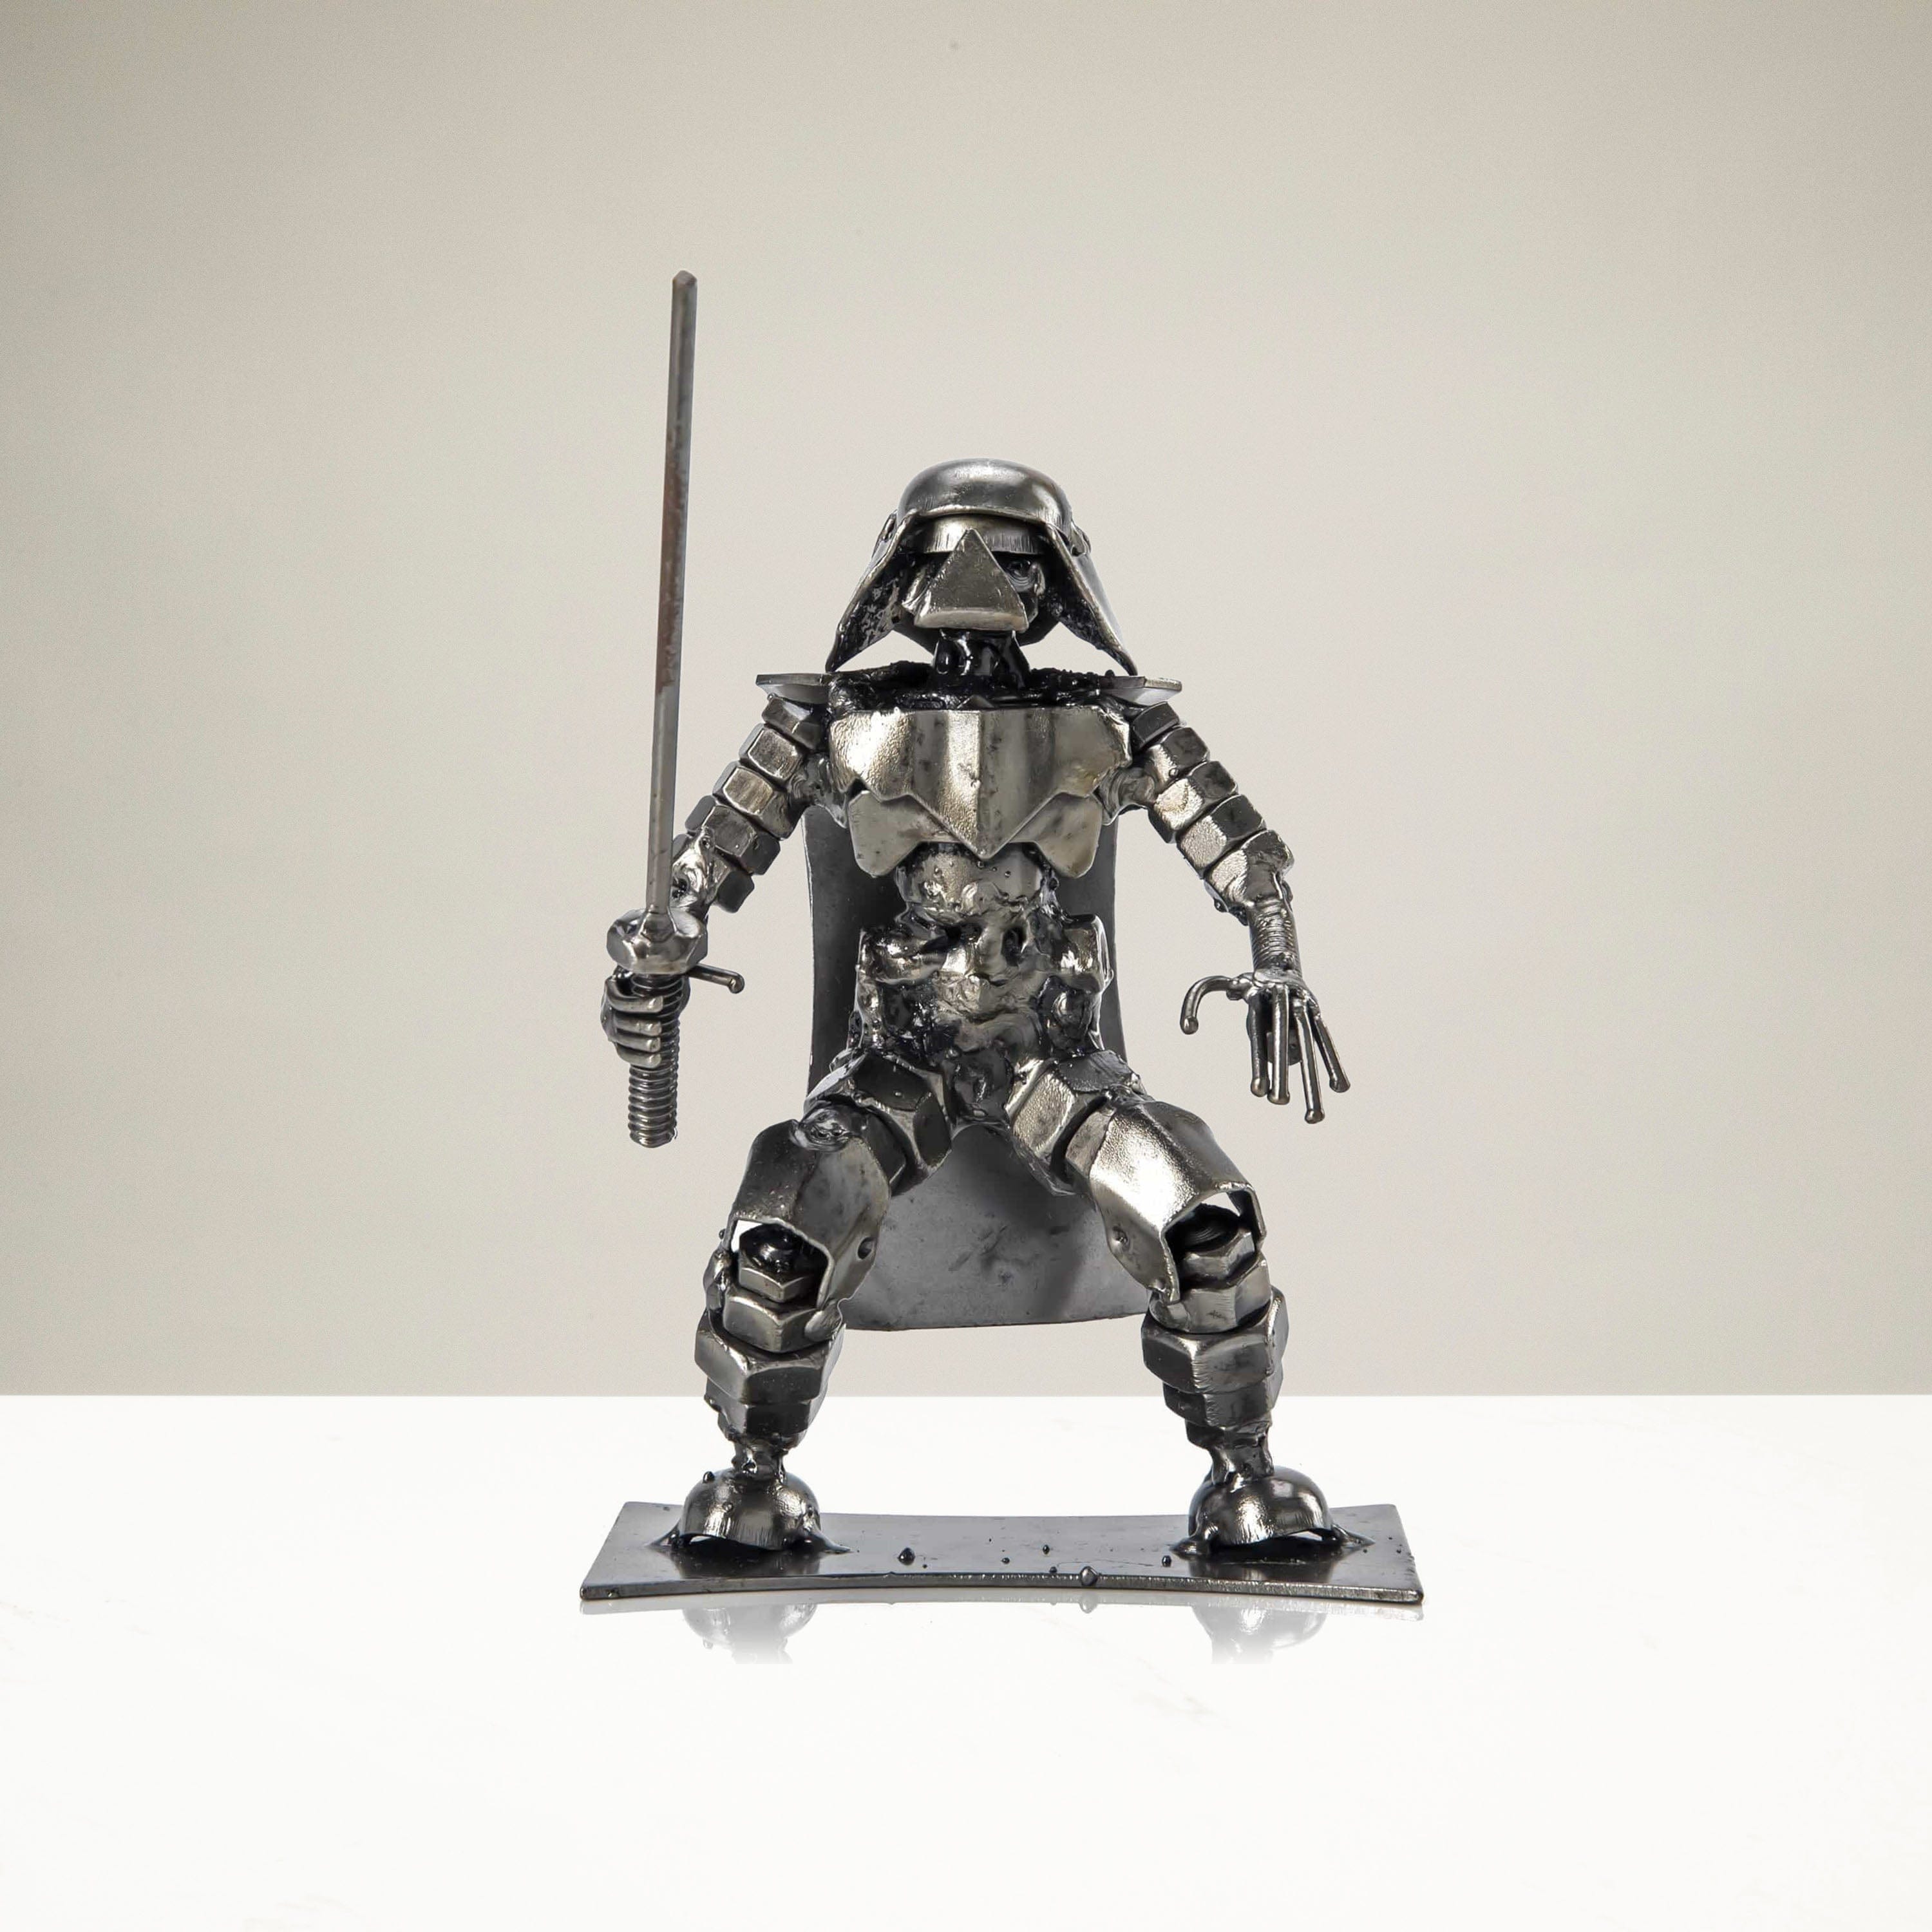 Kalifano Recycled Metal Art Darth Vader with Sword Inspired Recycled Metal Sculpture RMS-250DVB-N